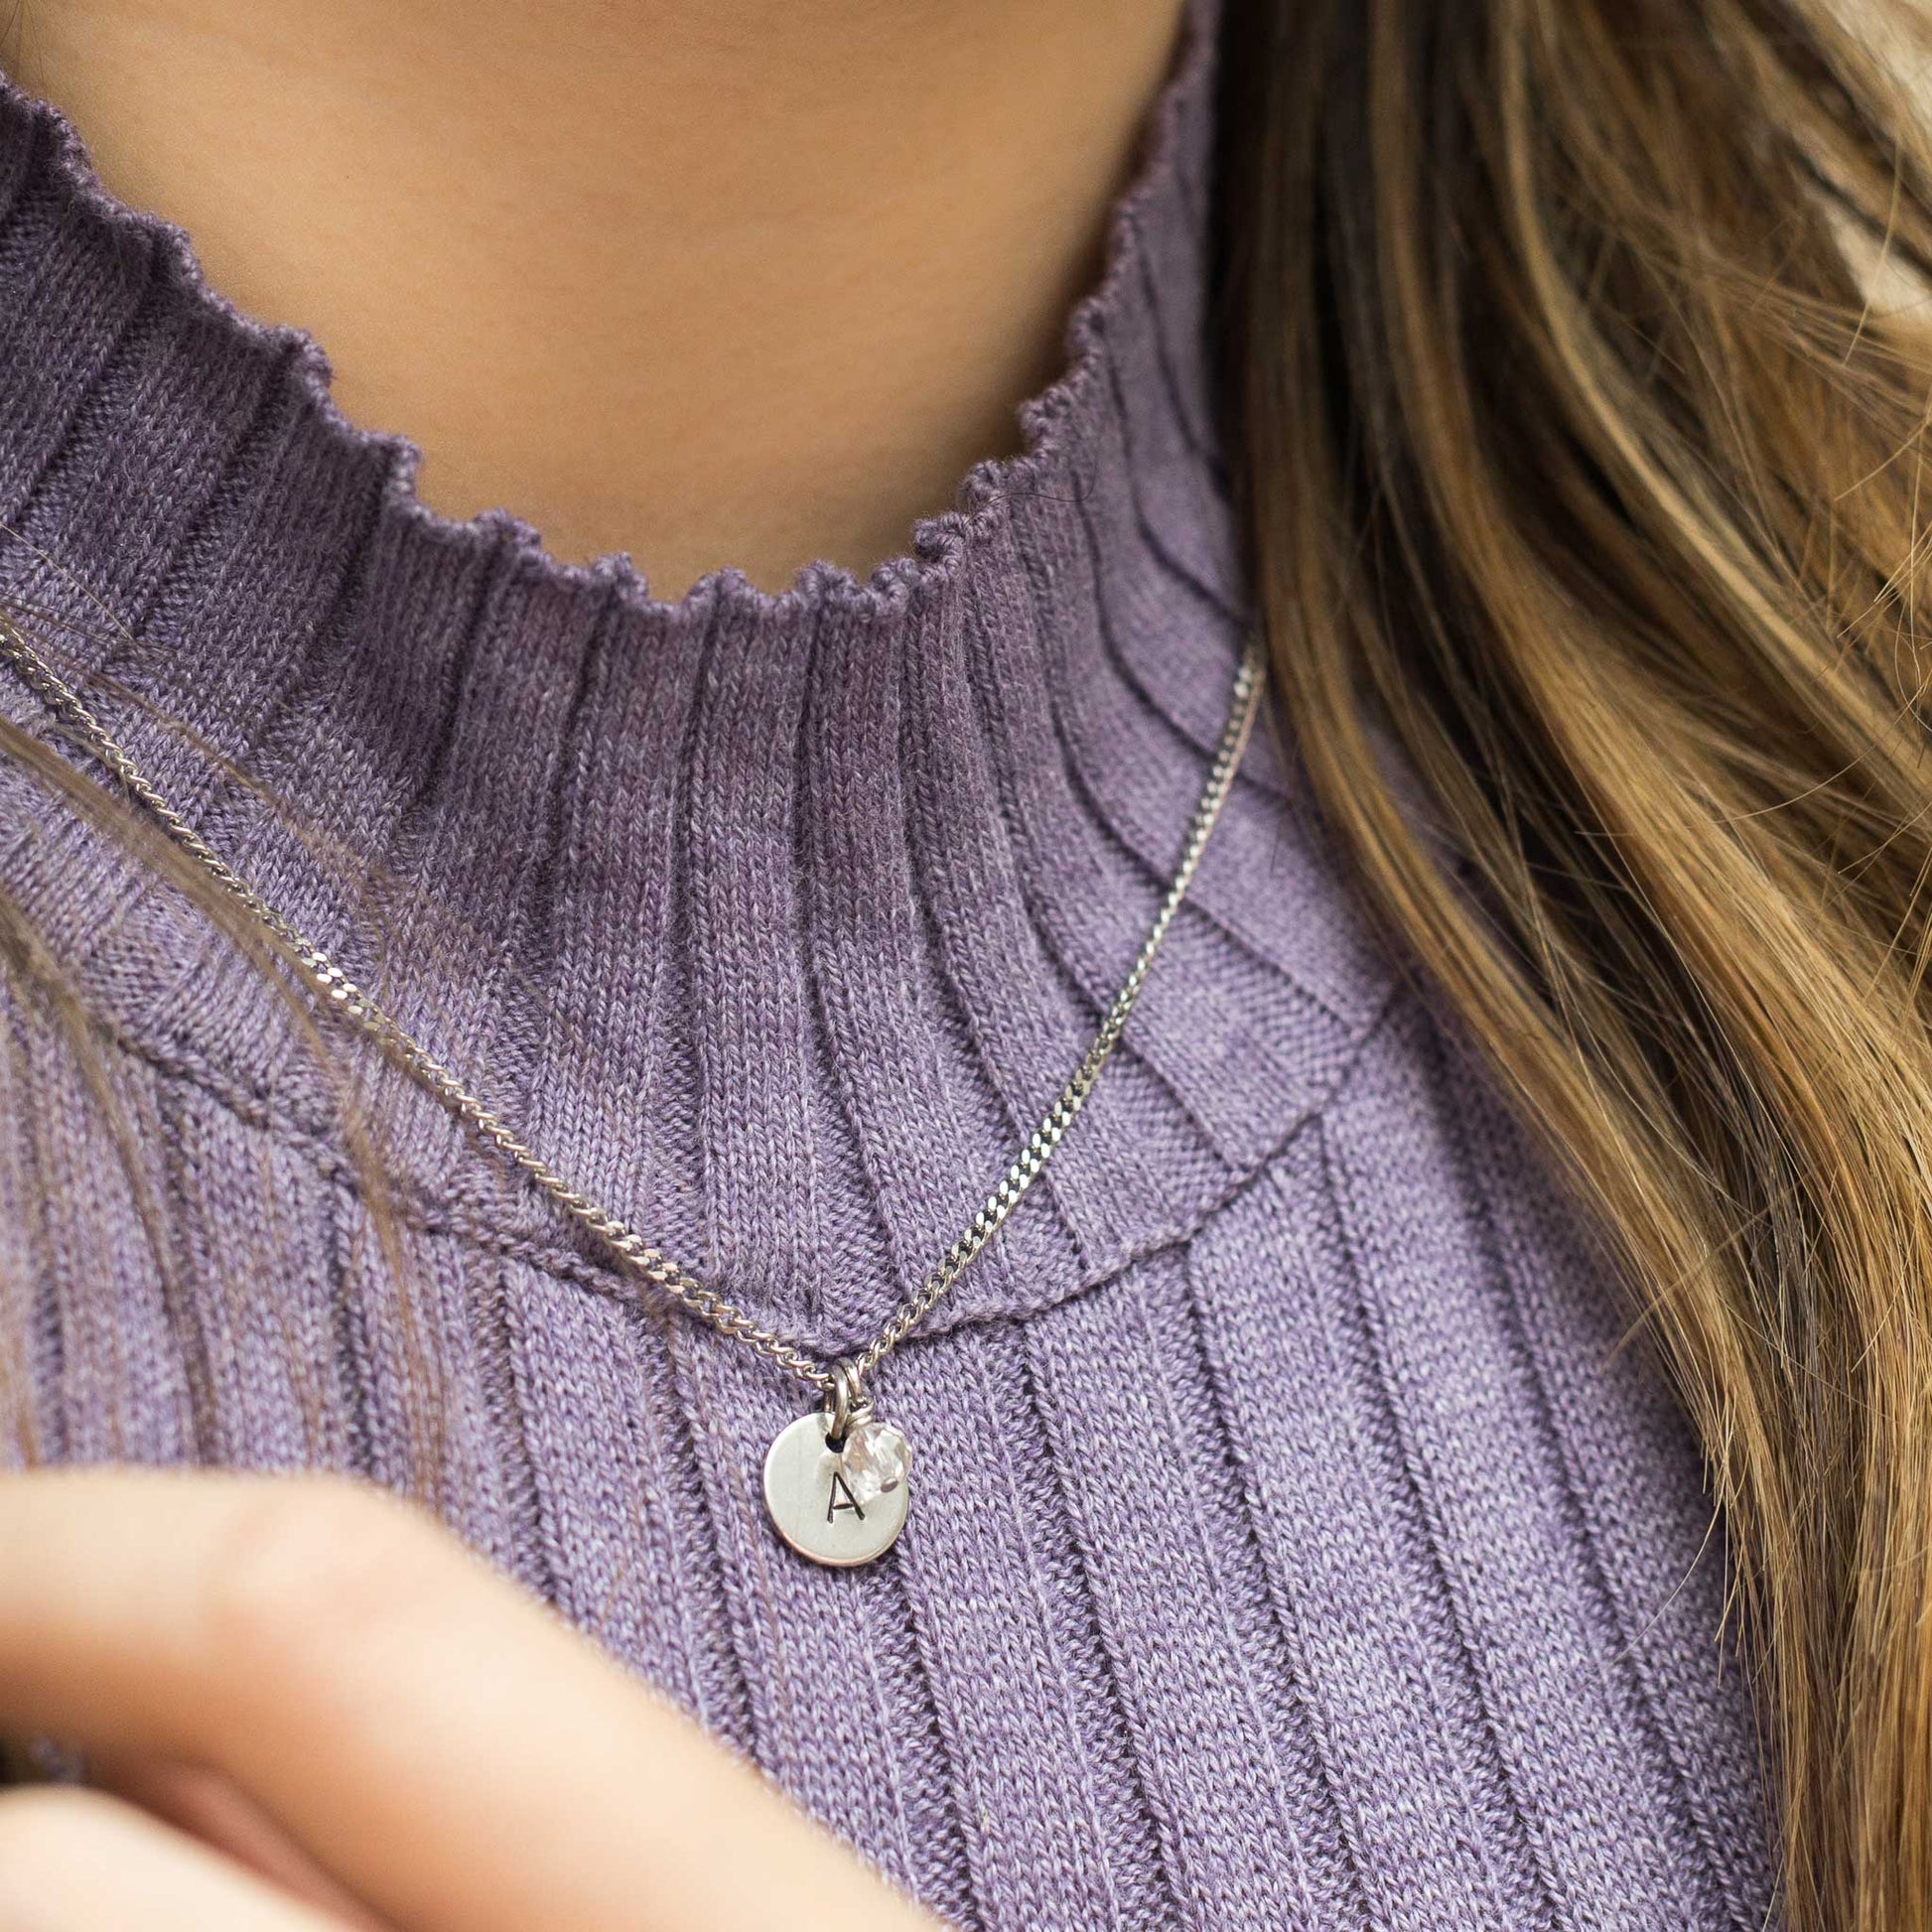 Model wearing initial birthstone necklace and purple sweater